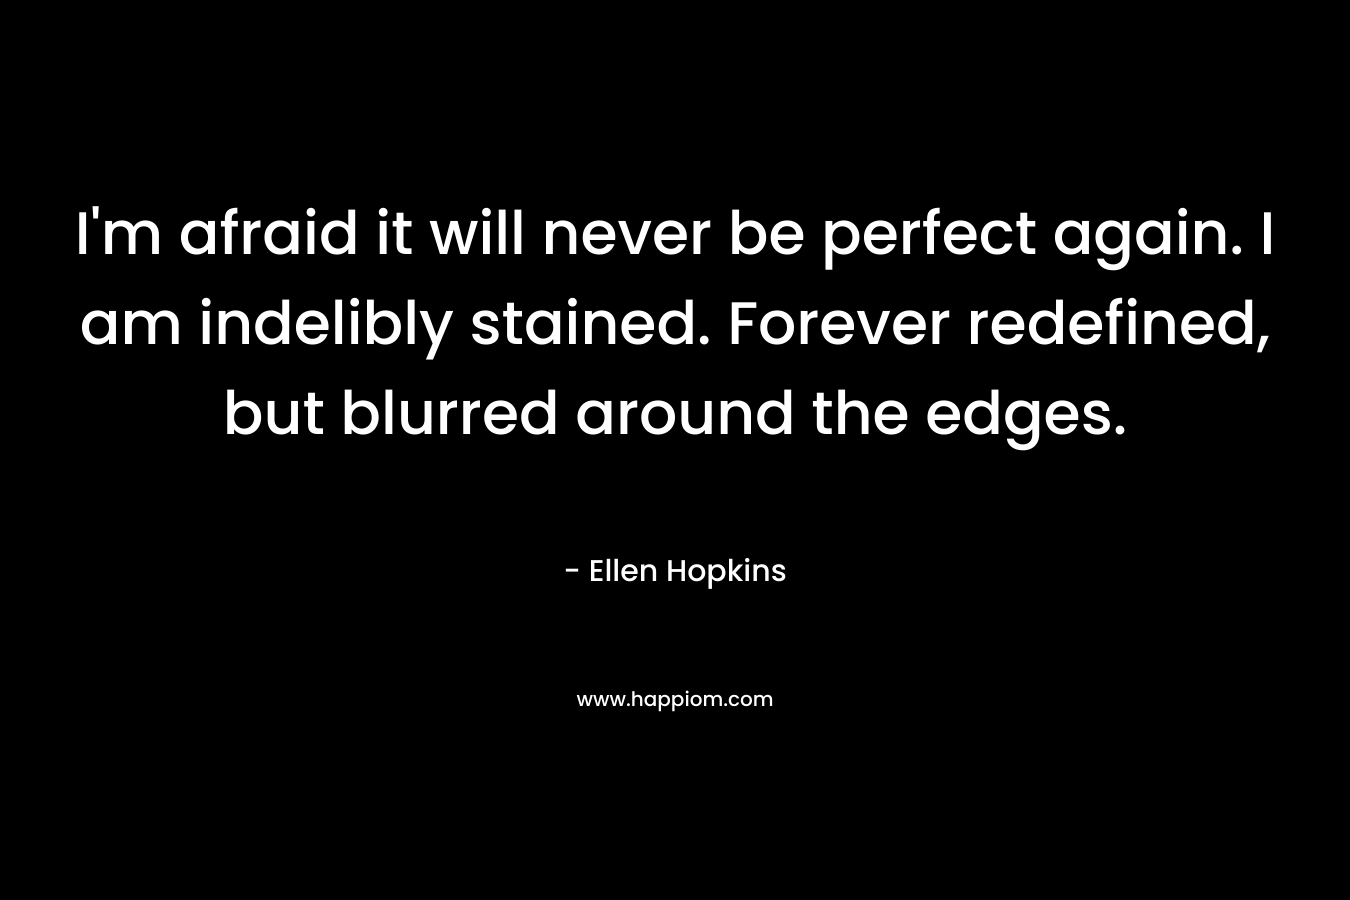 I’m afraid it will never be perfect again. I am indelibly stained. Forever redefined, but blurred around the edges. – Ellen Hopkins